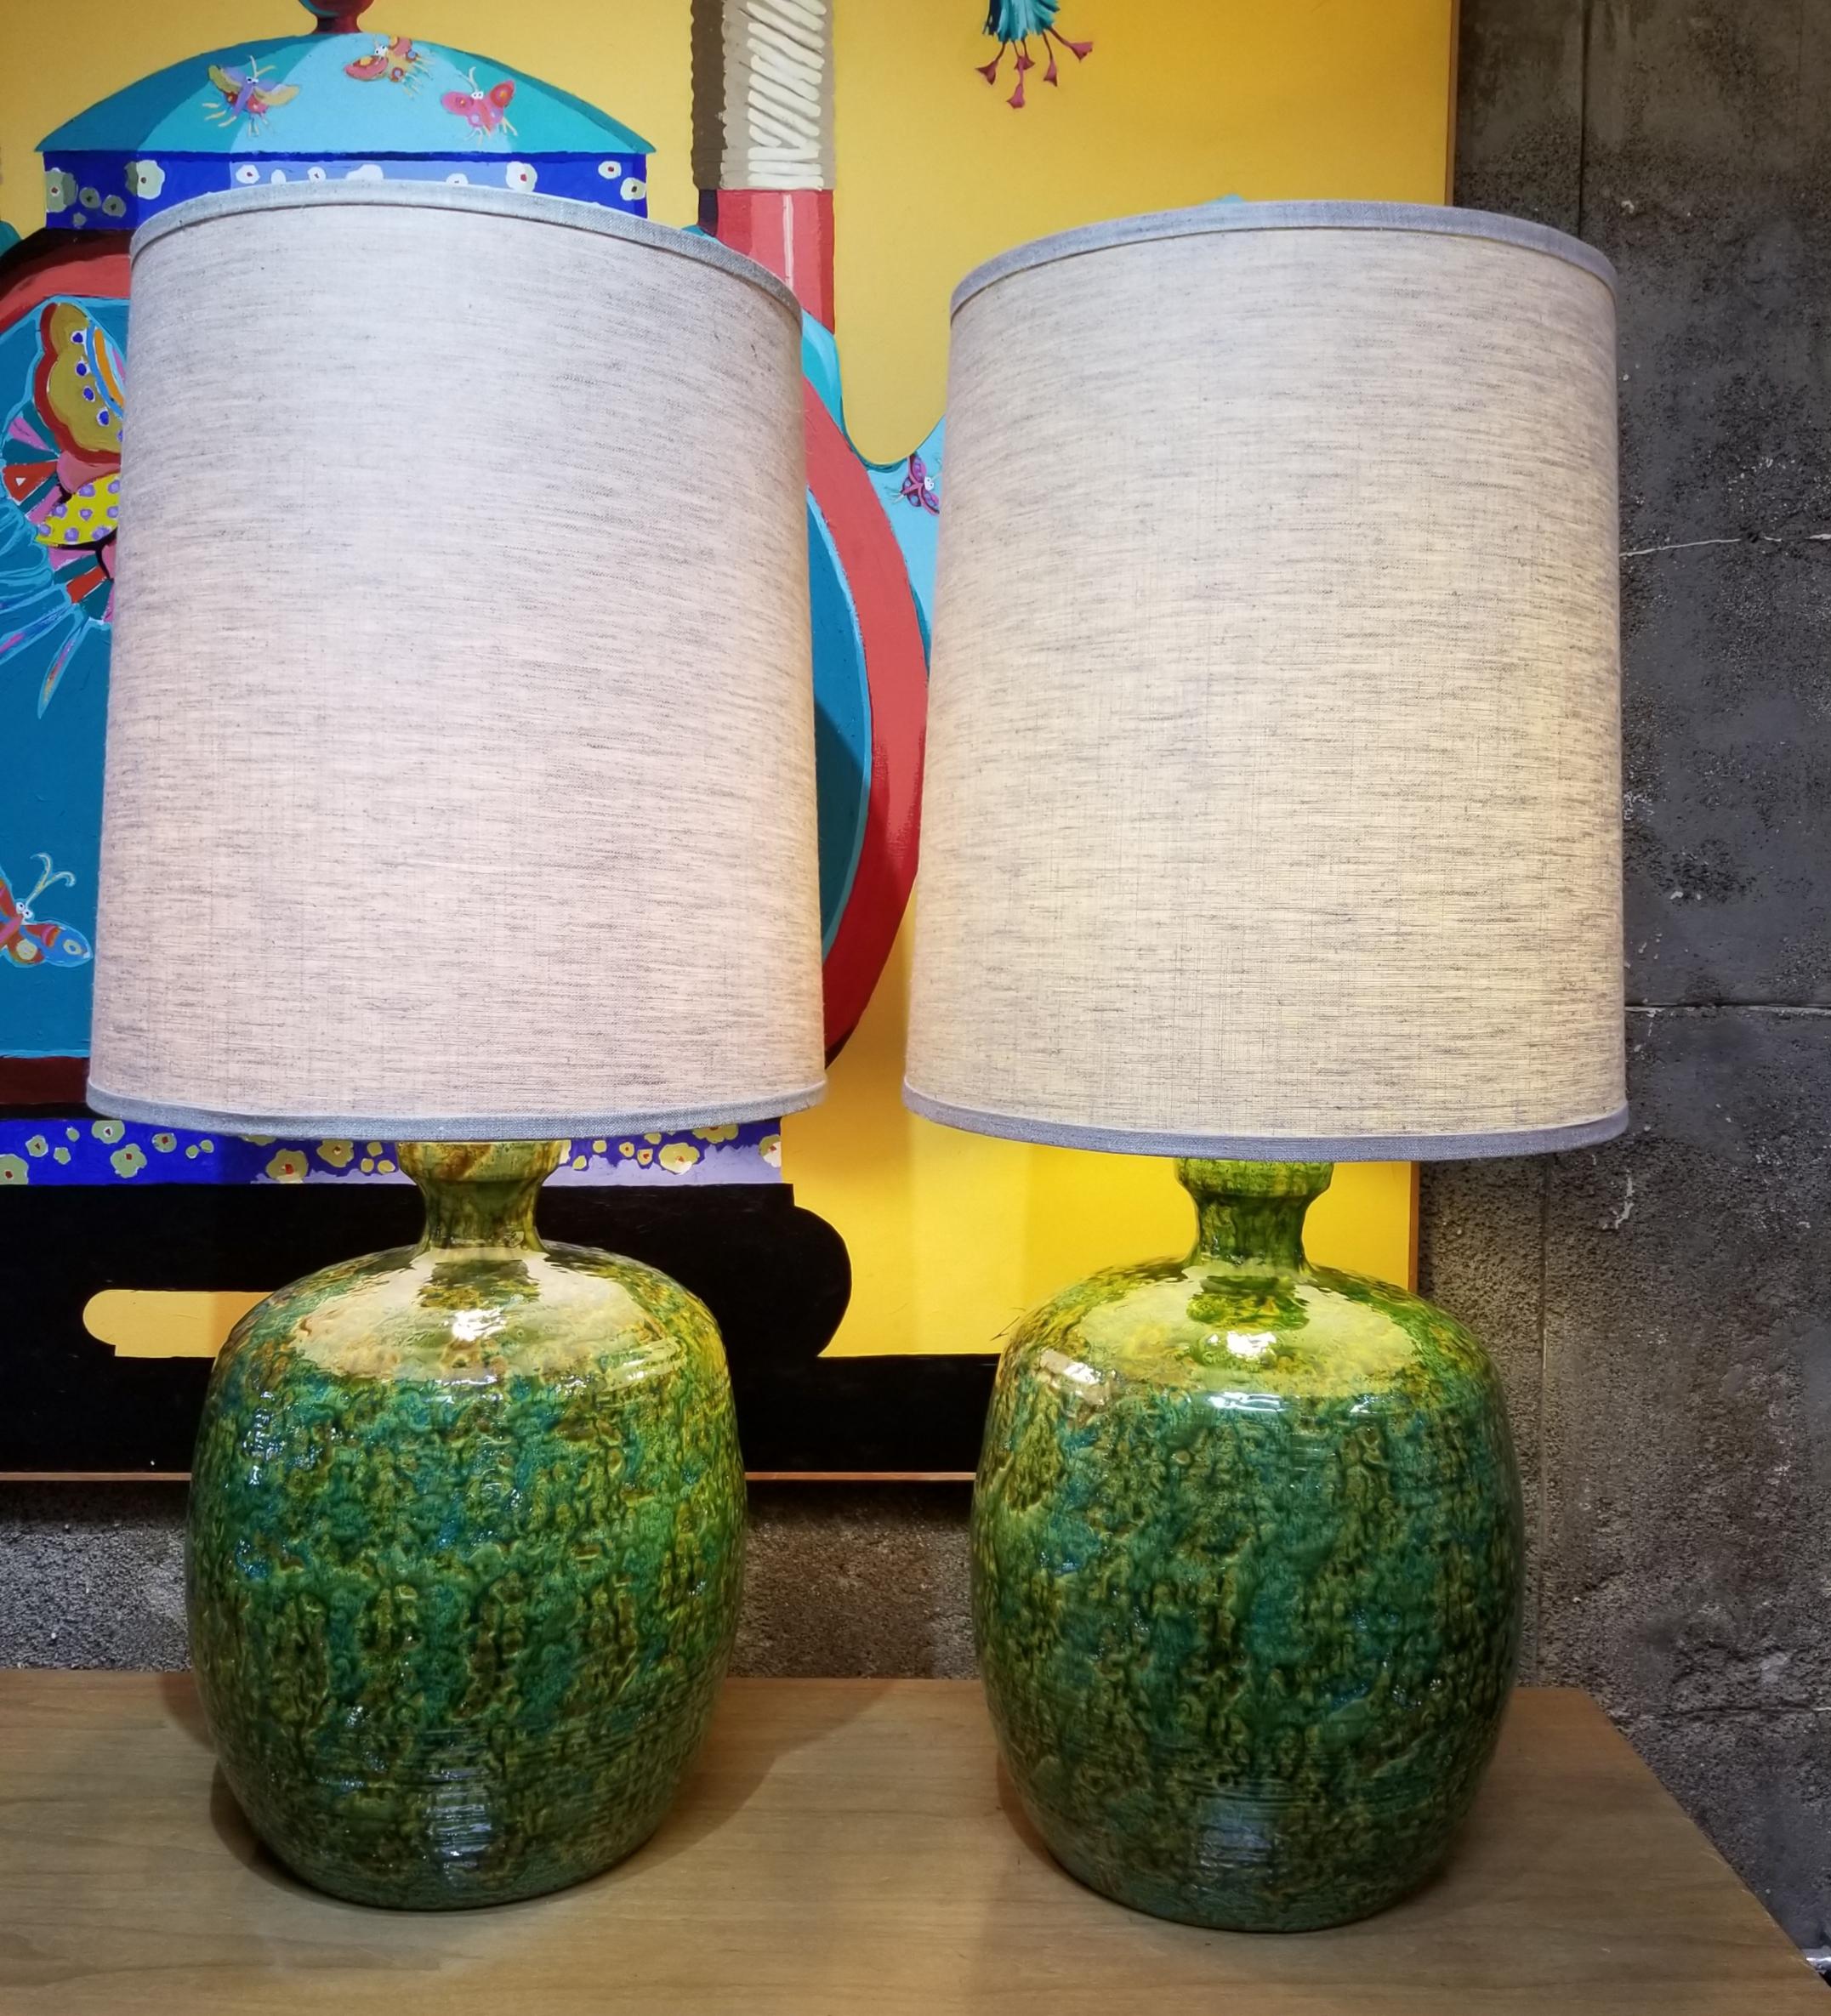 An impressive pair of mottled green, hand-thrown Mid-Century Modern ceramic table lamps with original shades. Amazing original condition. 3-way sockets. Ceramic base only measures 18.5